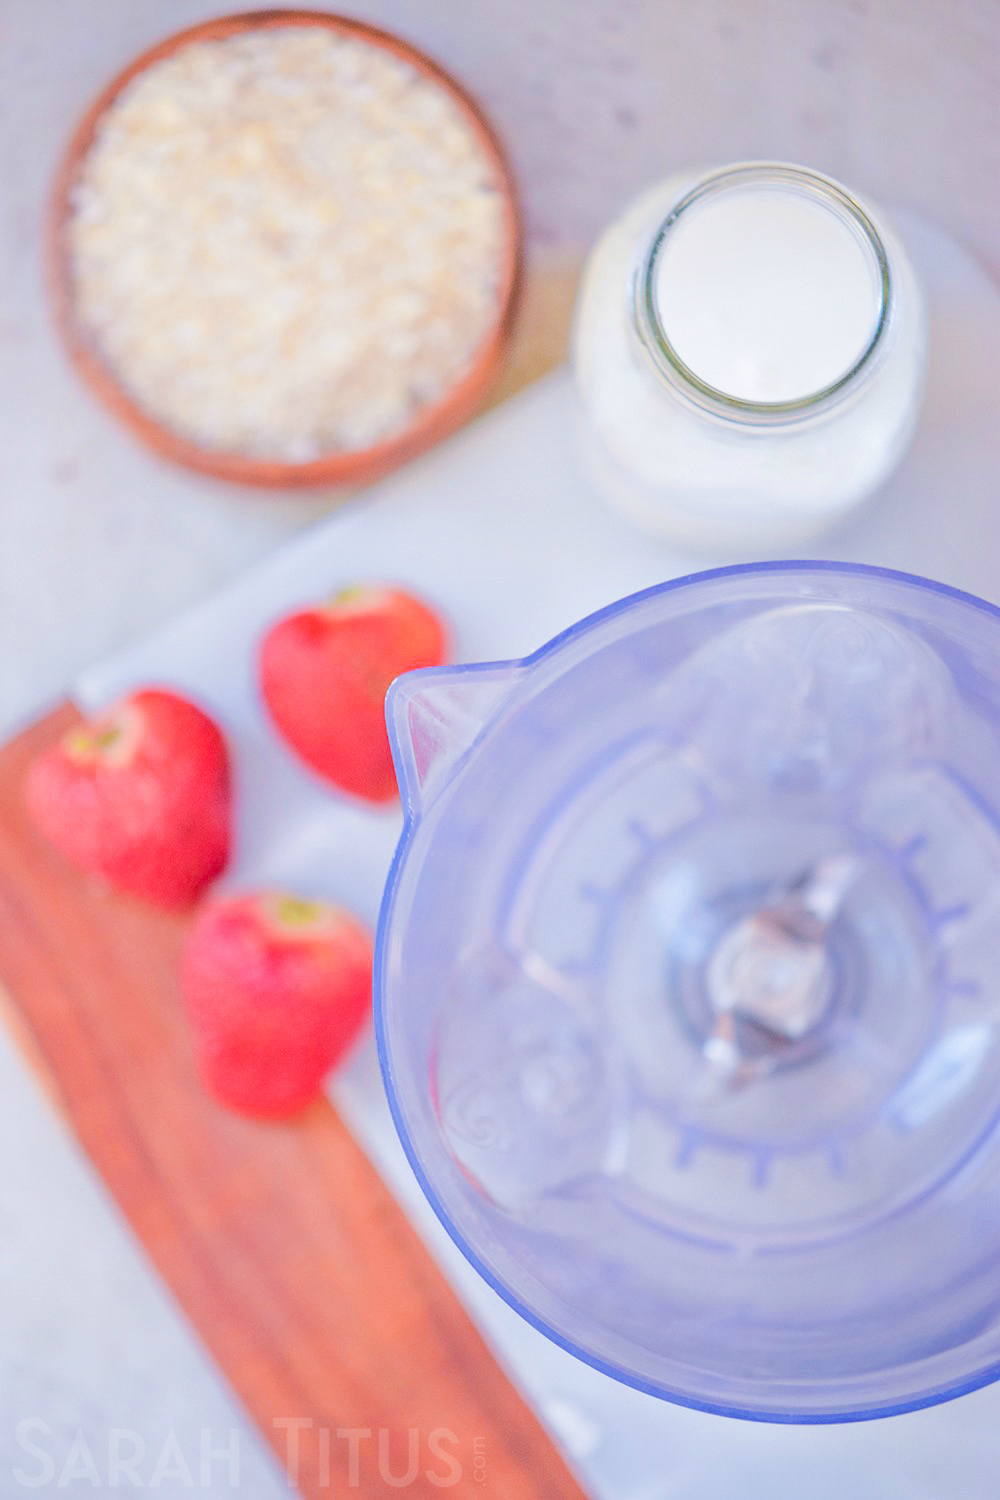 What to do with those flavorless oatmeal packets no one will eat- make this delicious Strawberry Breakfast Milkshake!